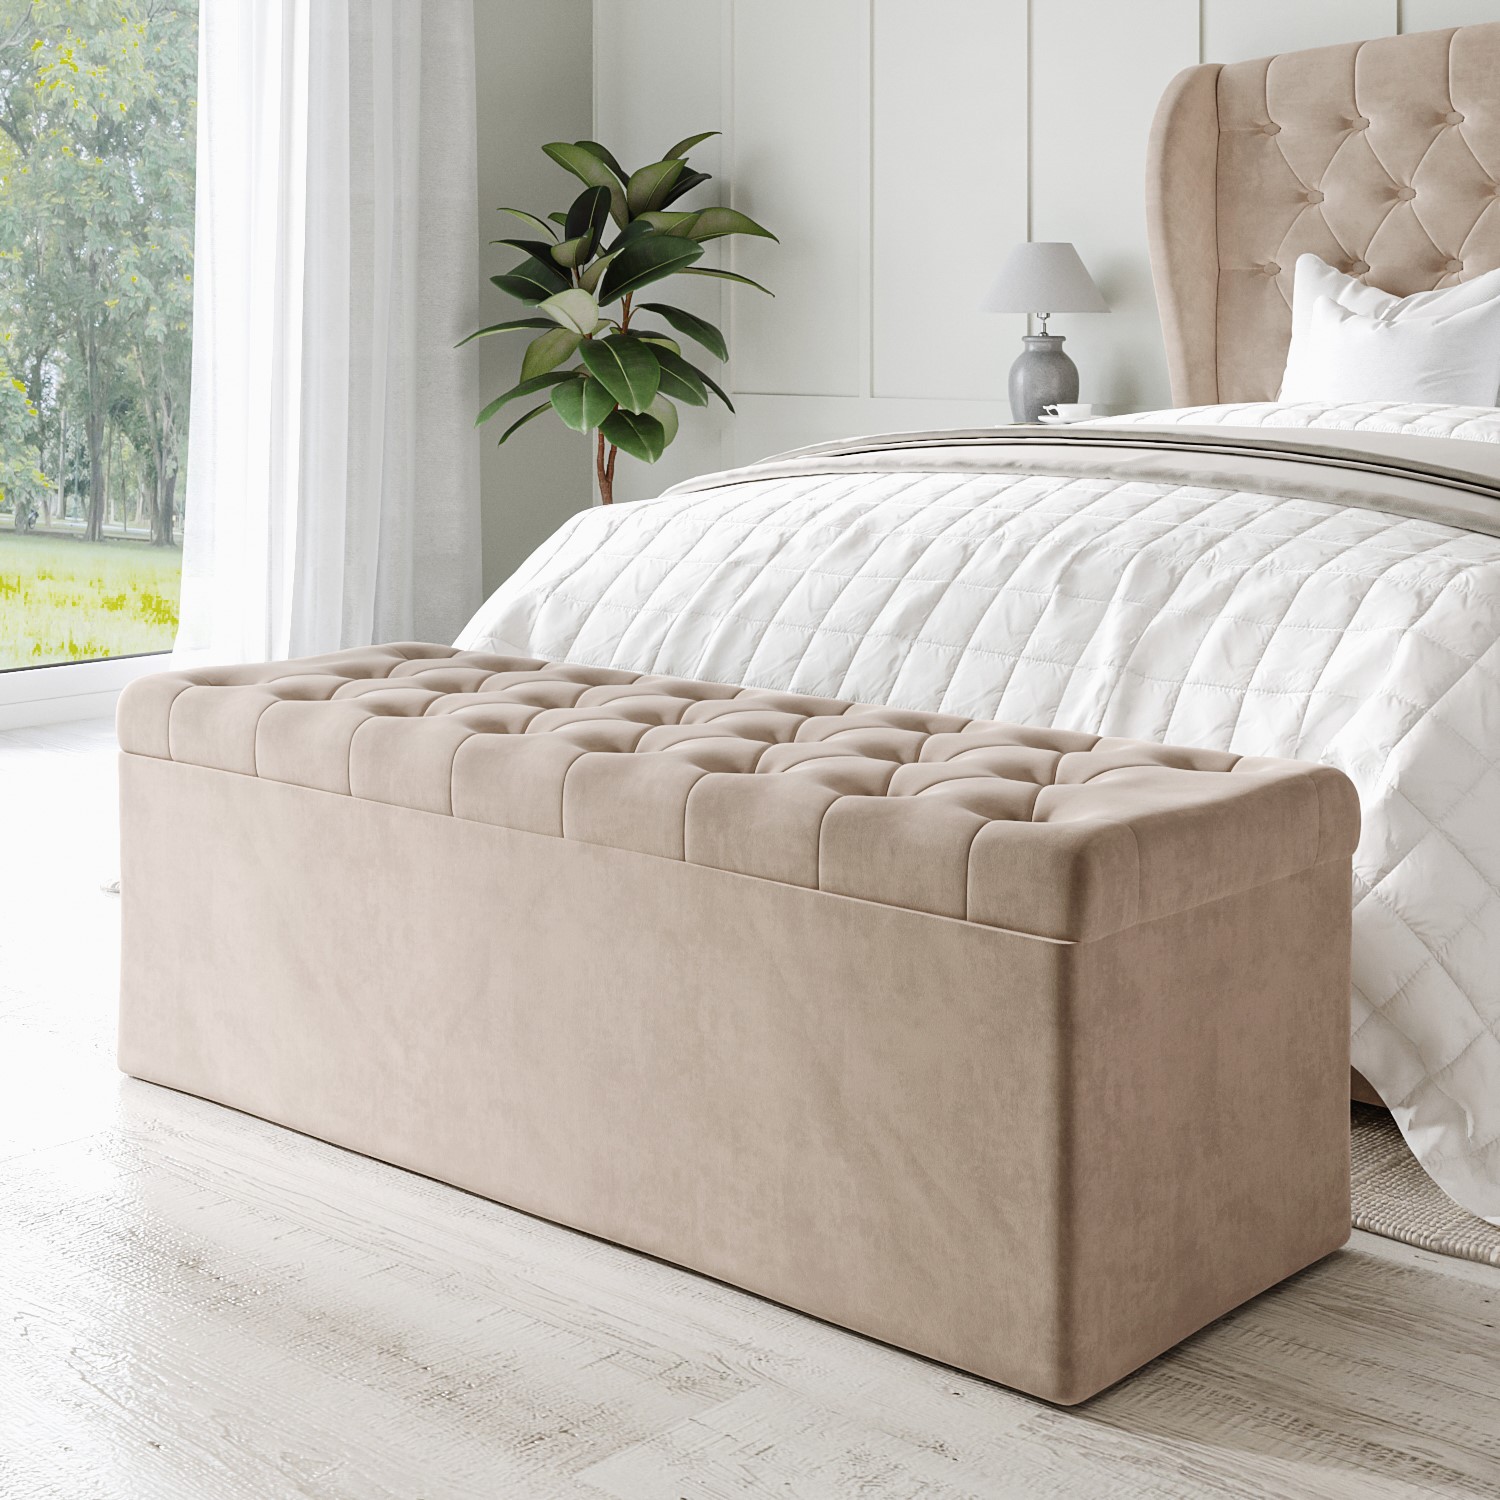 Read more about Beige velvet double ottoman bed with blanket box safina